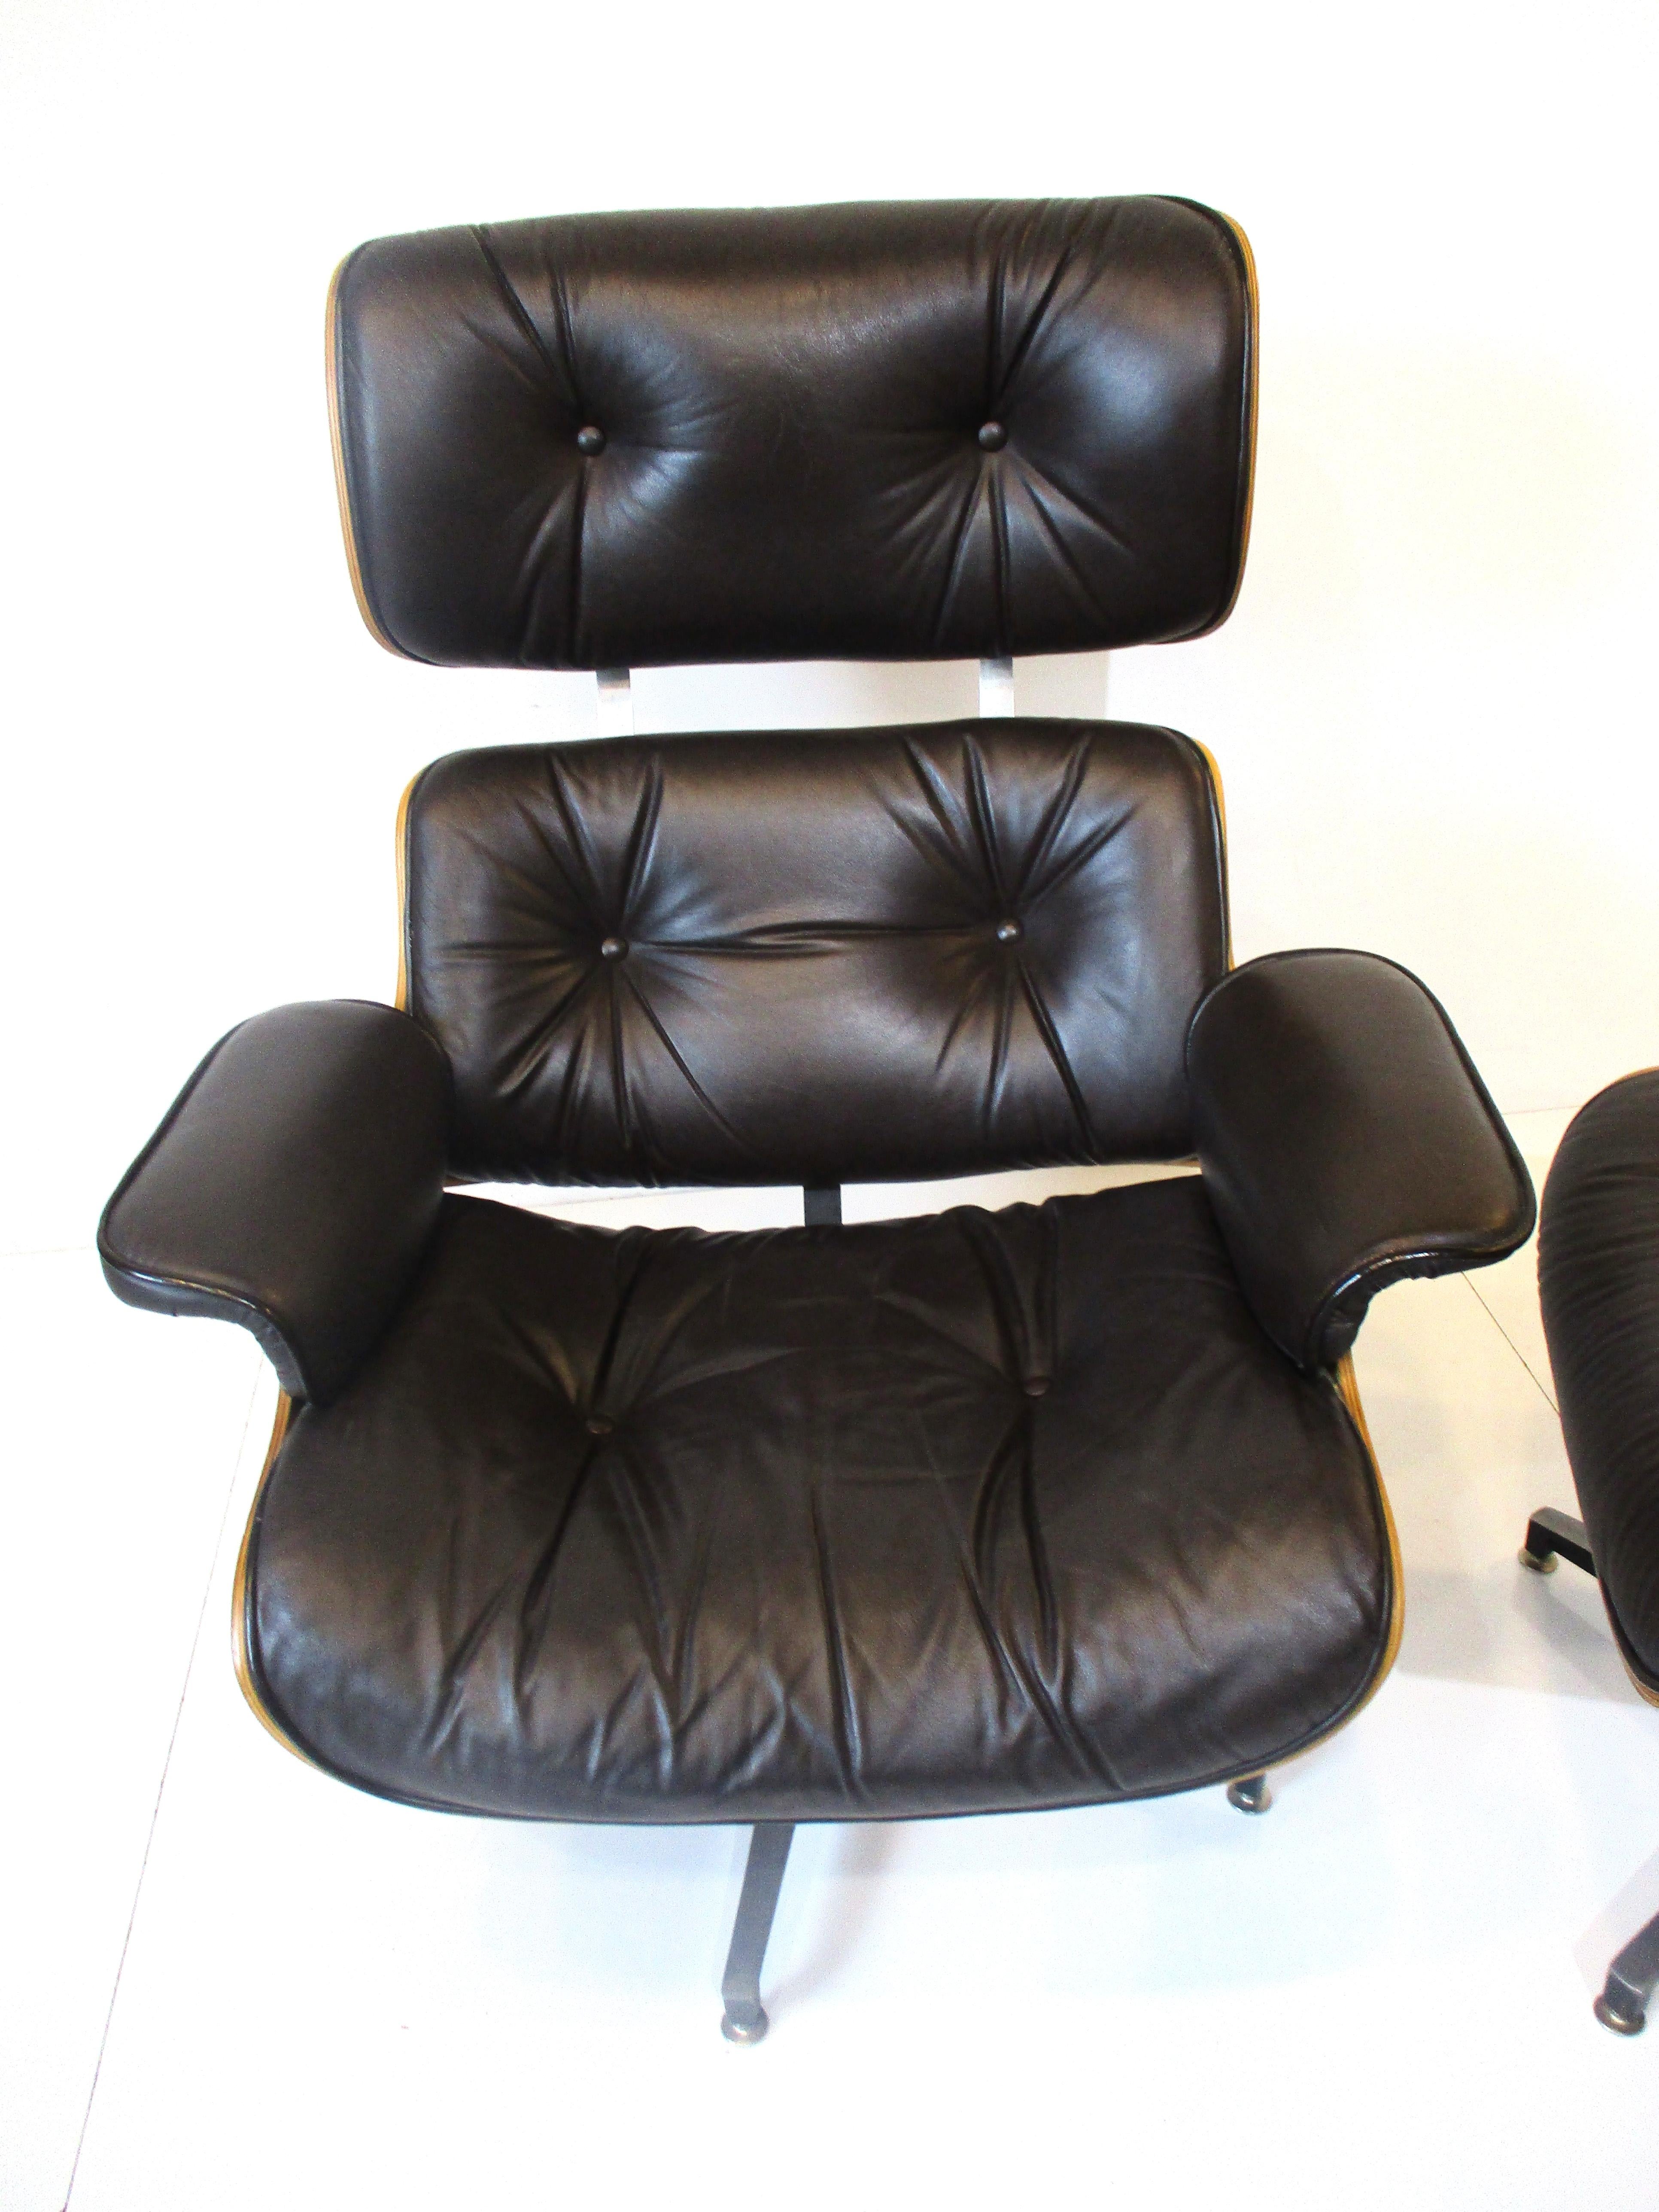 American Selig Lounge Chair W/ Ottoman in Chocolate Leather in the Style of Eames